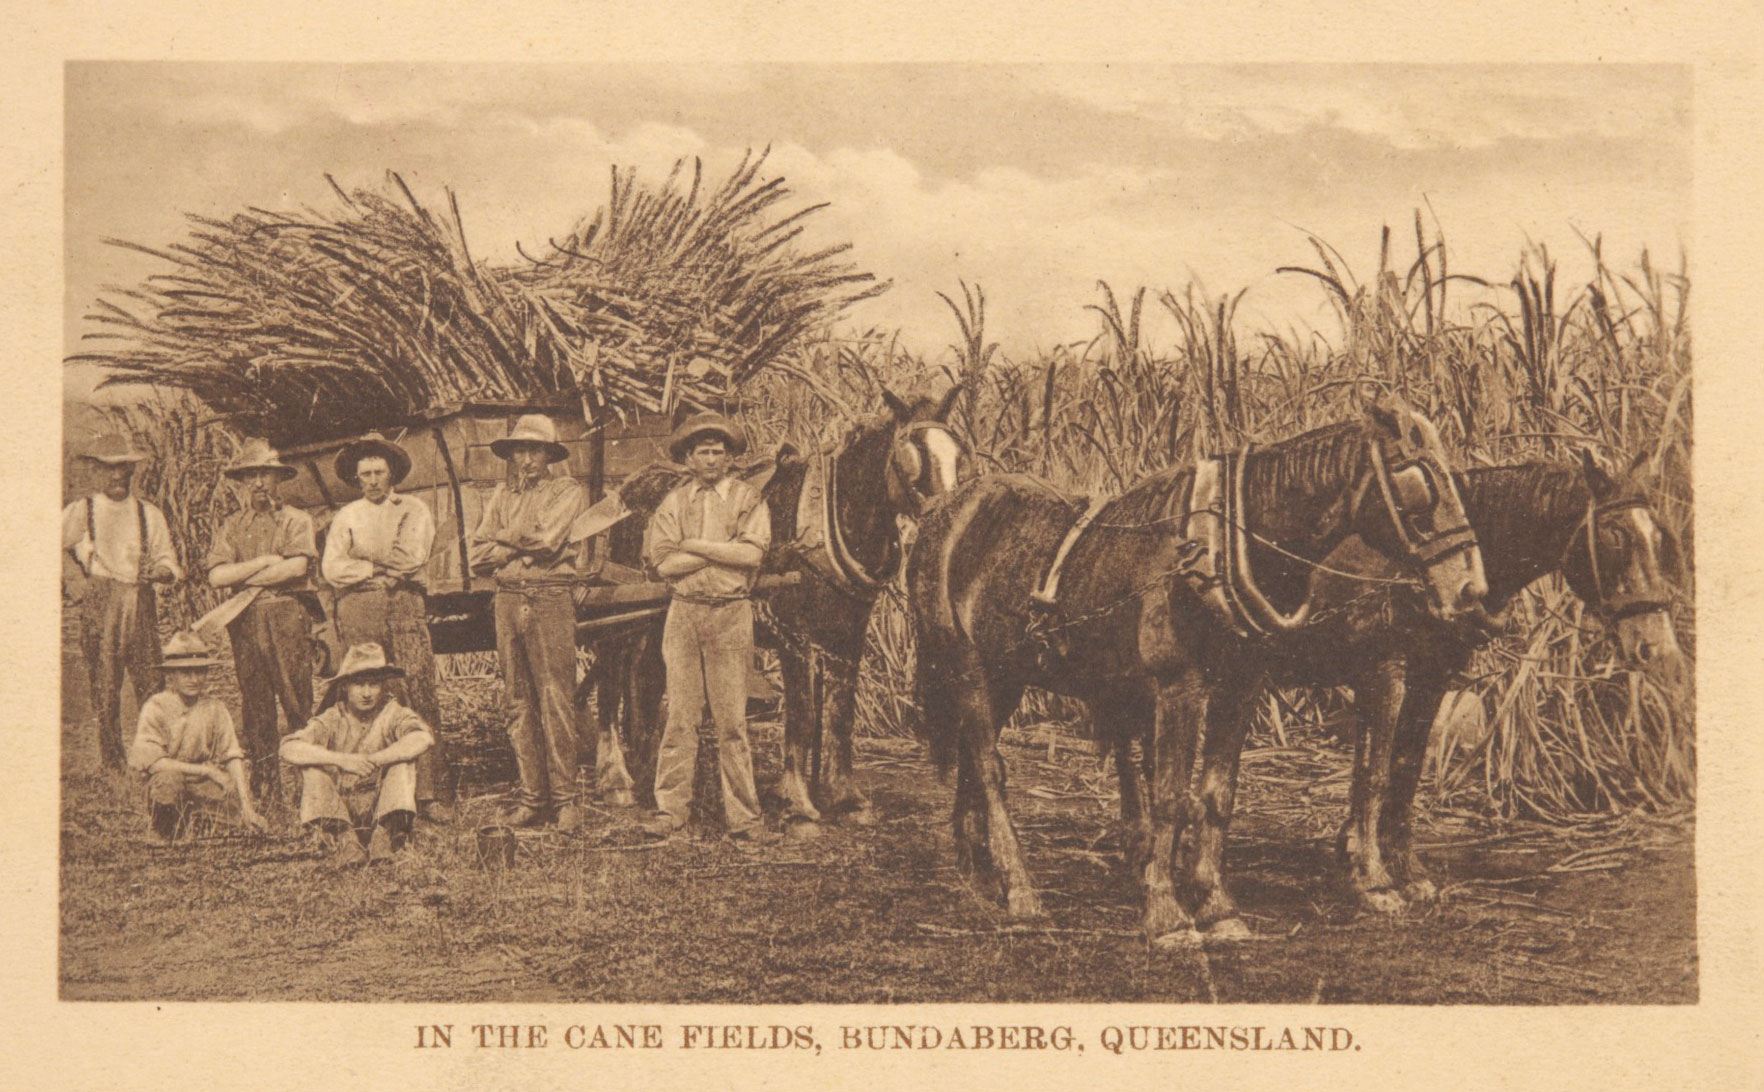 Photographic postcard, ‘In the Cane Fields, Bundaberg, Queensland’, about 1914.